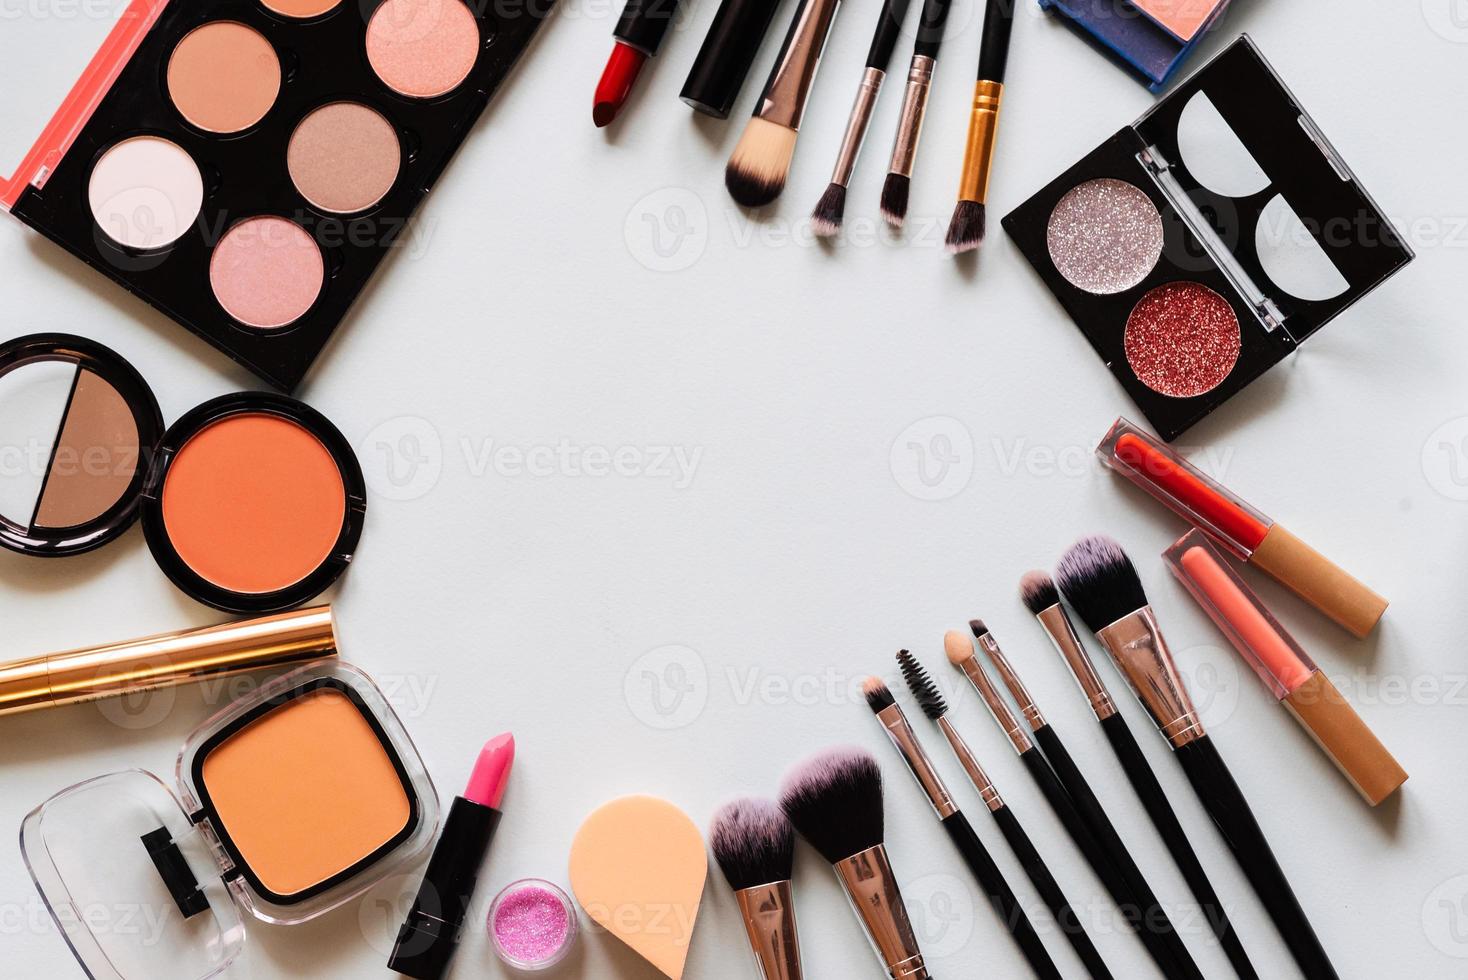 Set of professional cosmetic make-up brushes, shadows, lipstick - isolated light background. Overhead view. Place text photo